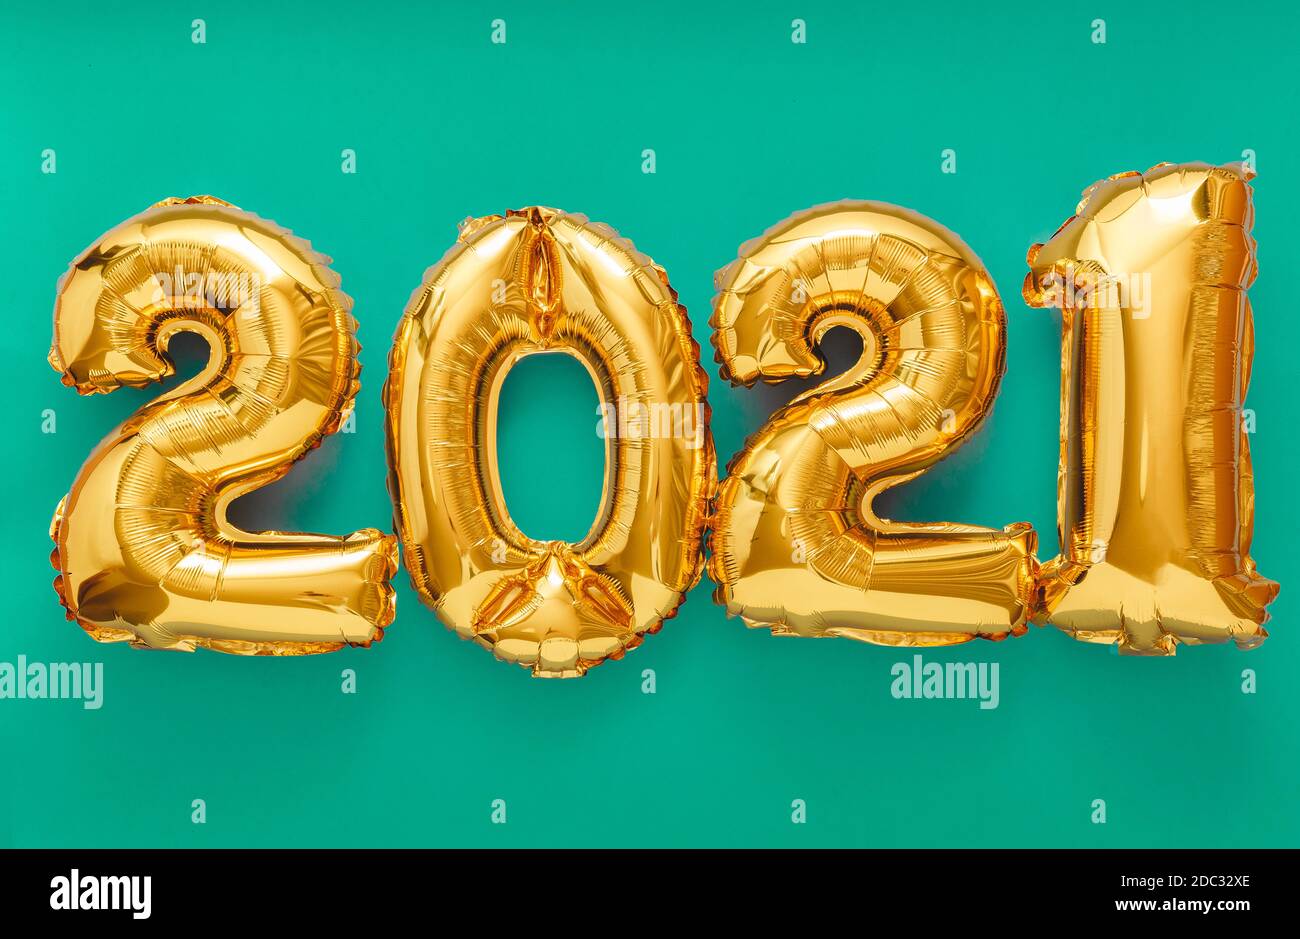 2021 air balloon gold text on green background. Happy New year eve invitation with Christmas gold foil balloons 2021. Stock Photo